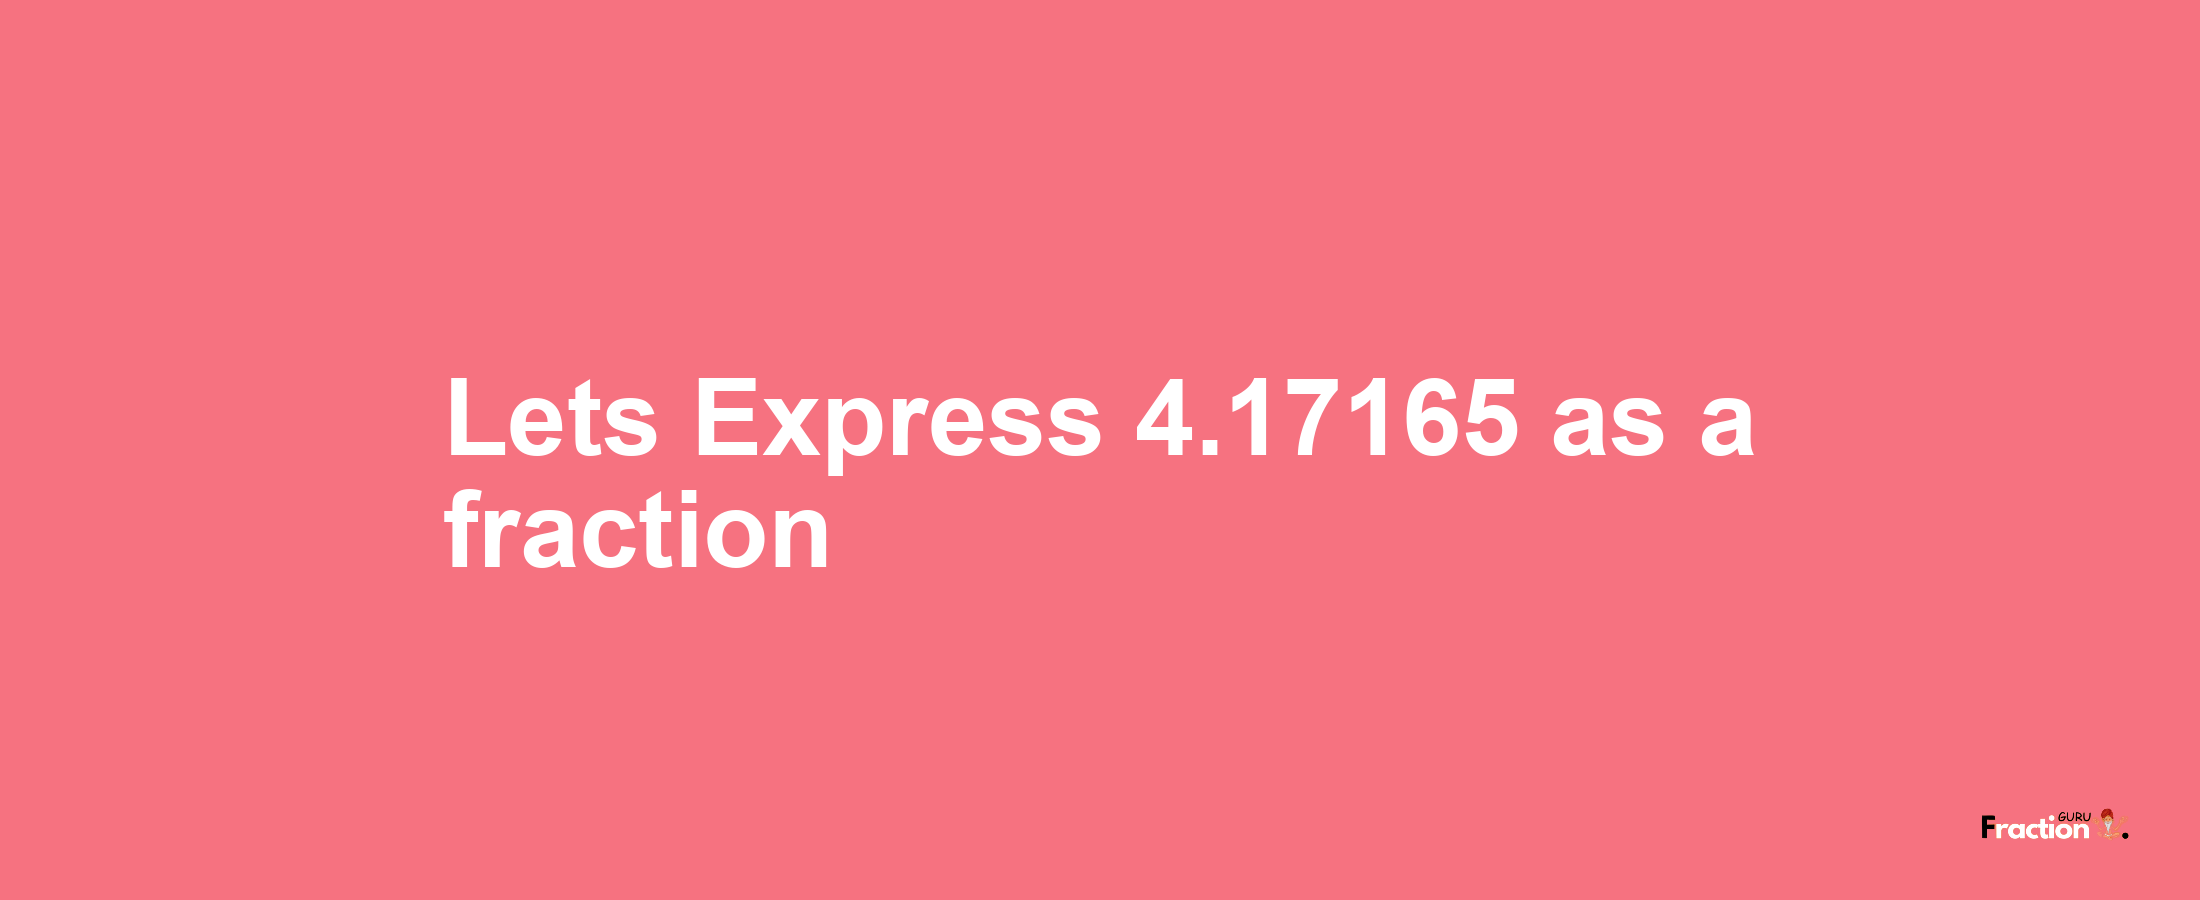 Lets Express 4.17165 as afraction